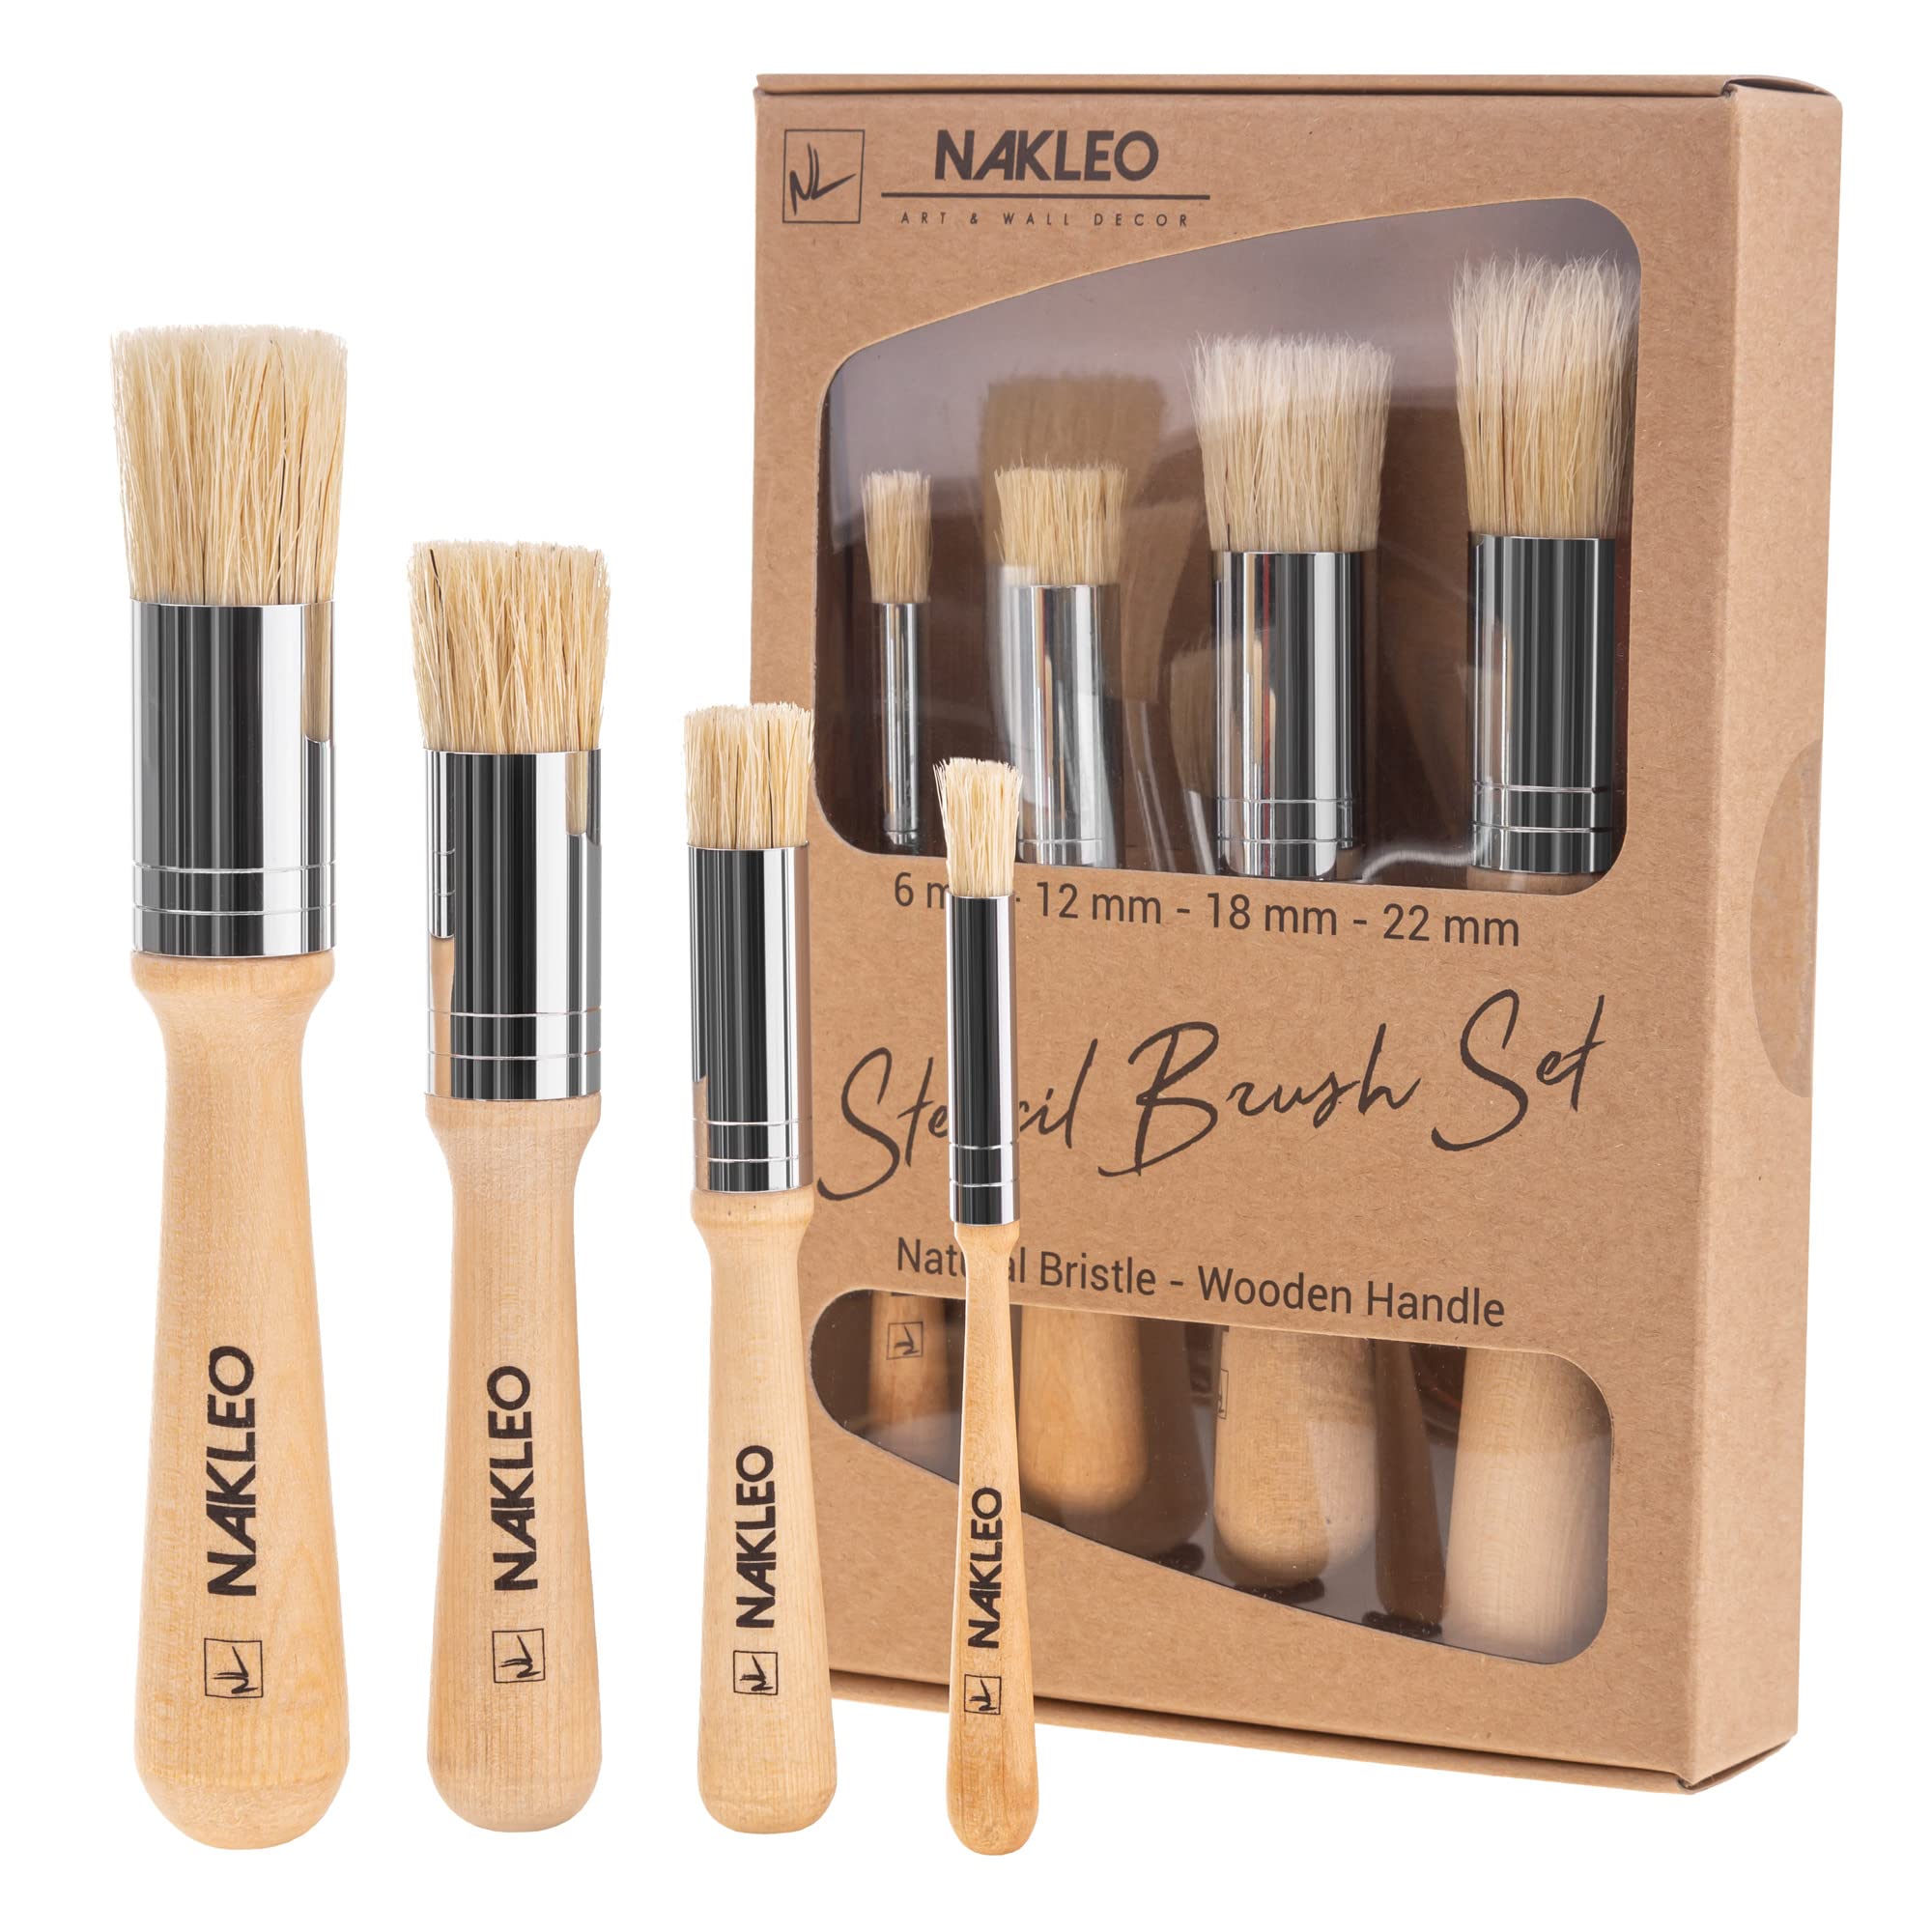 4 Pcs Wooden Stencil Brush Set - Natural Bristle - 6-12-18-22 mm - 1/4,  1/2, 3/4 and 1 inch - for stenciling, waxing, Chalk, Oil and Acrylic Paint